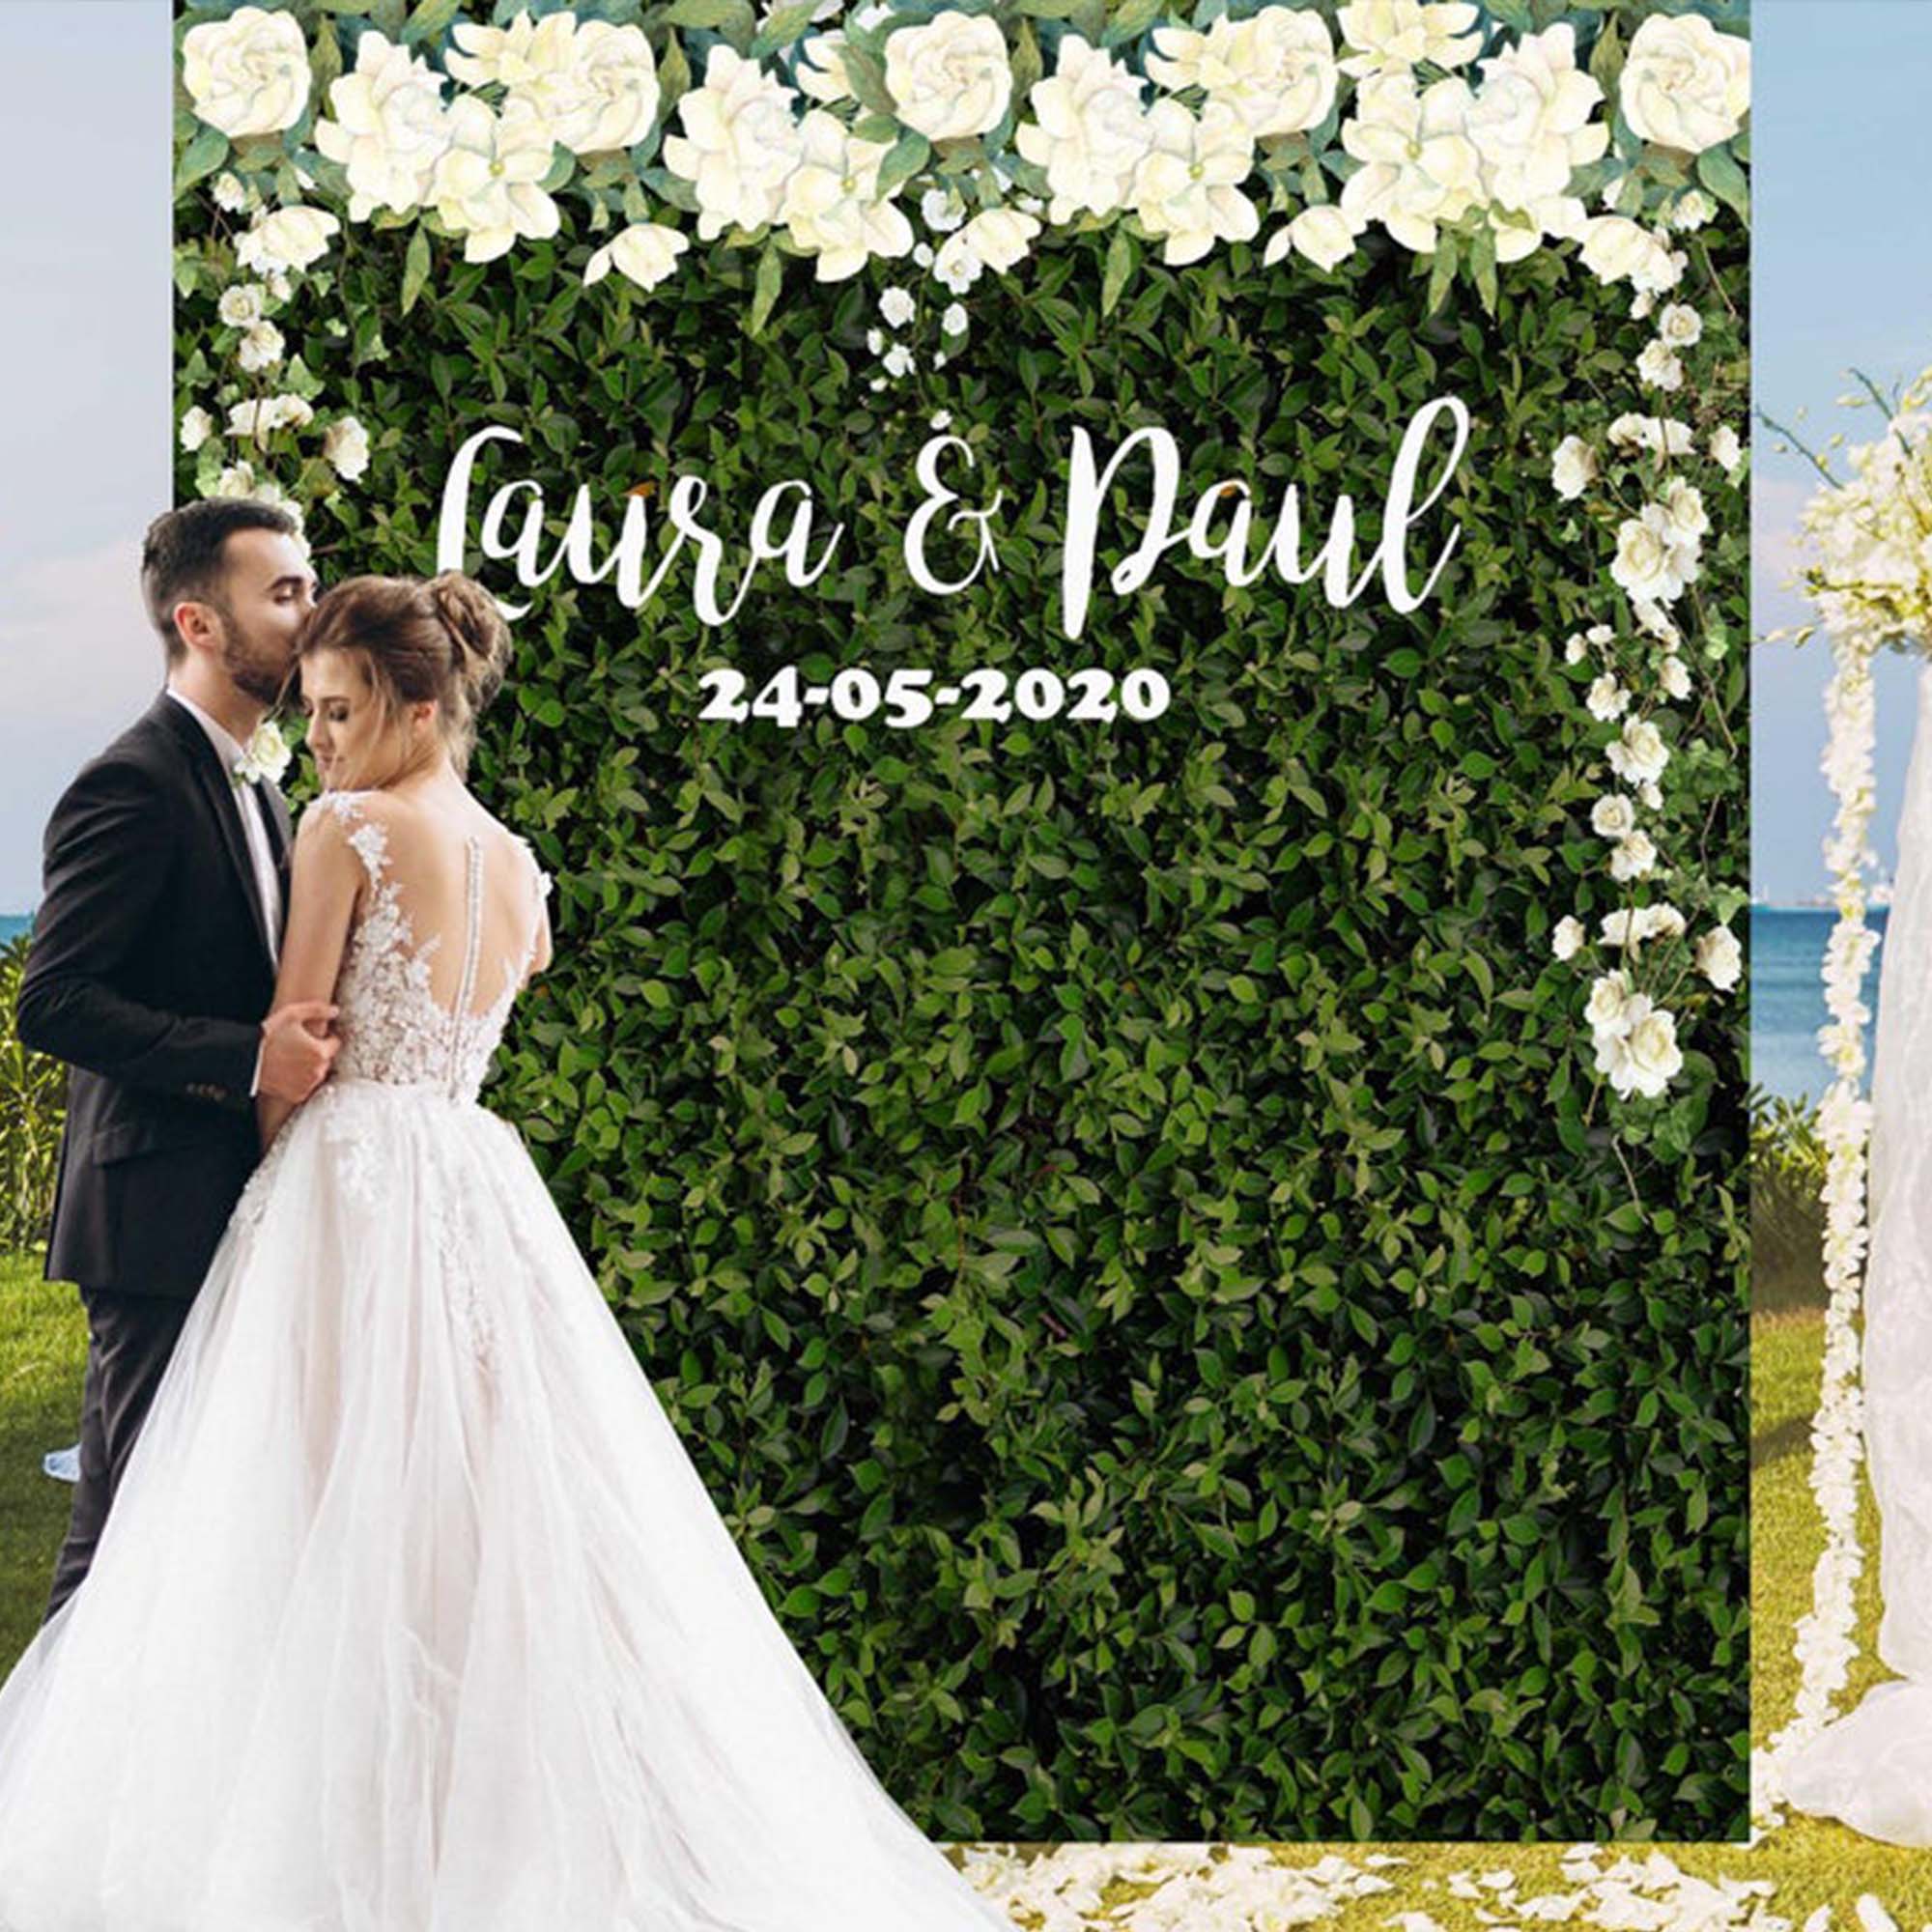 Personalized Grass Wedding Backdrop with flowers / Spring Wedding Decor iJay Backdrops 